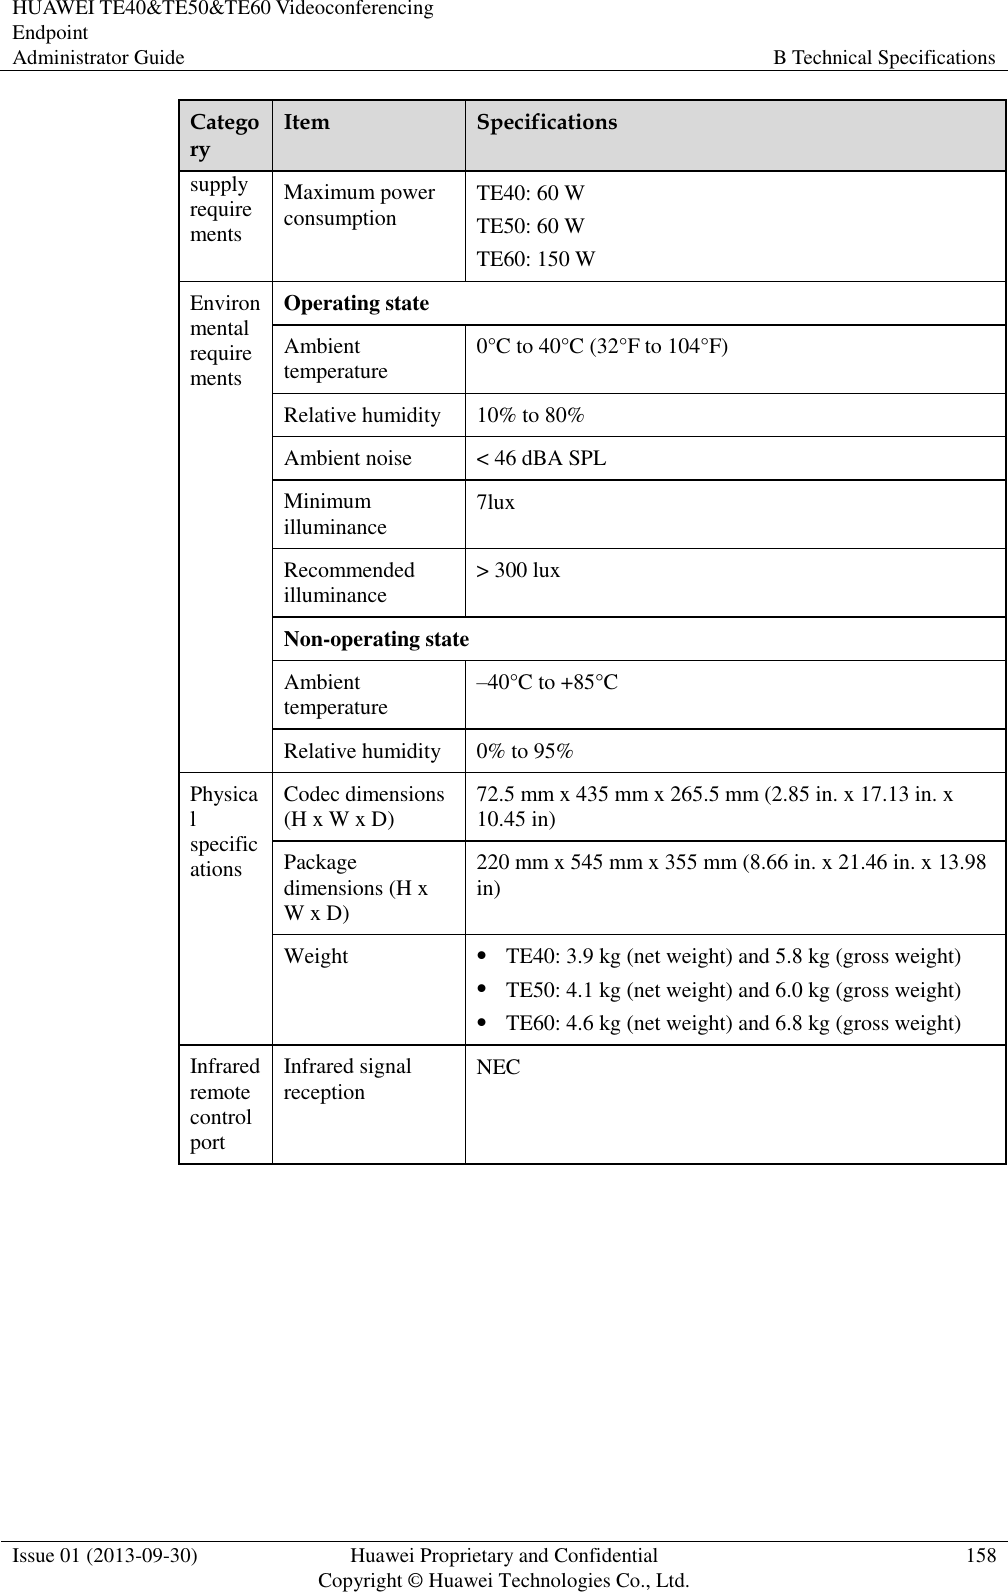 HUAWEI TE40&amp;TE50&amp;TE60 Videoconferencing Endpoint Administrator Guide B Technical Specifications  Issue 01 (2013-09-30) Huawei Proprietary and Confidential                                     Copyright © Huawei Technologies Co., Ltd. 158  Category Item Specifications supply requirements Maximum power consumption TE40: 60 W TE50: 60 W TE60: 150 W Environmental requirements Operating state Ambient temperature 0°C to 40°C (32°F to 104°F) Relative humidity 10% to 80% Ambient noise &lt; 46 dBA SPL Minimum illuminance 7lux Recommended illuminance &gt; 300 lux Non-operating state Ambient temperature –40°C to +85°C Relative humidity 0% to 95% Physical specifications Codec dimensions (H x W x D) 72.5 mm x 435 mm x 265.5 mm (2.85 in. x 17.13 in. x 10.45 in) Package dimensions (H x W x D) 220 mm x 545 mm x 355 mm (8.66 in. x 21.46 in. x 13.98 in) Weight  TE40: 3.9 kg (net weight) and 5.8 kg (gross weight)  TE50: 4.1 kg (net weight) and 6.0 kg (gross weight)  TE60: 4.6 kg (net weight) and 6.8 kg (gross weight) Infrared remote control port Infrared signal reception NEC 